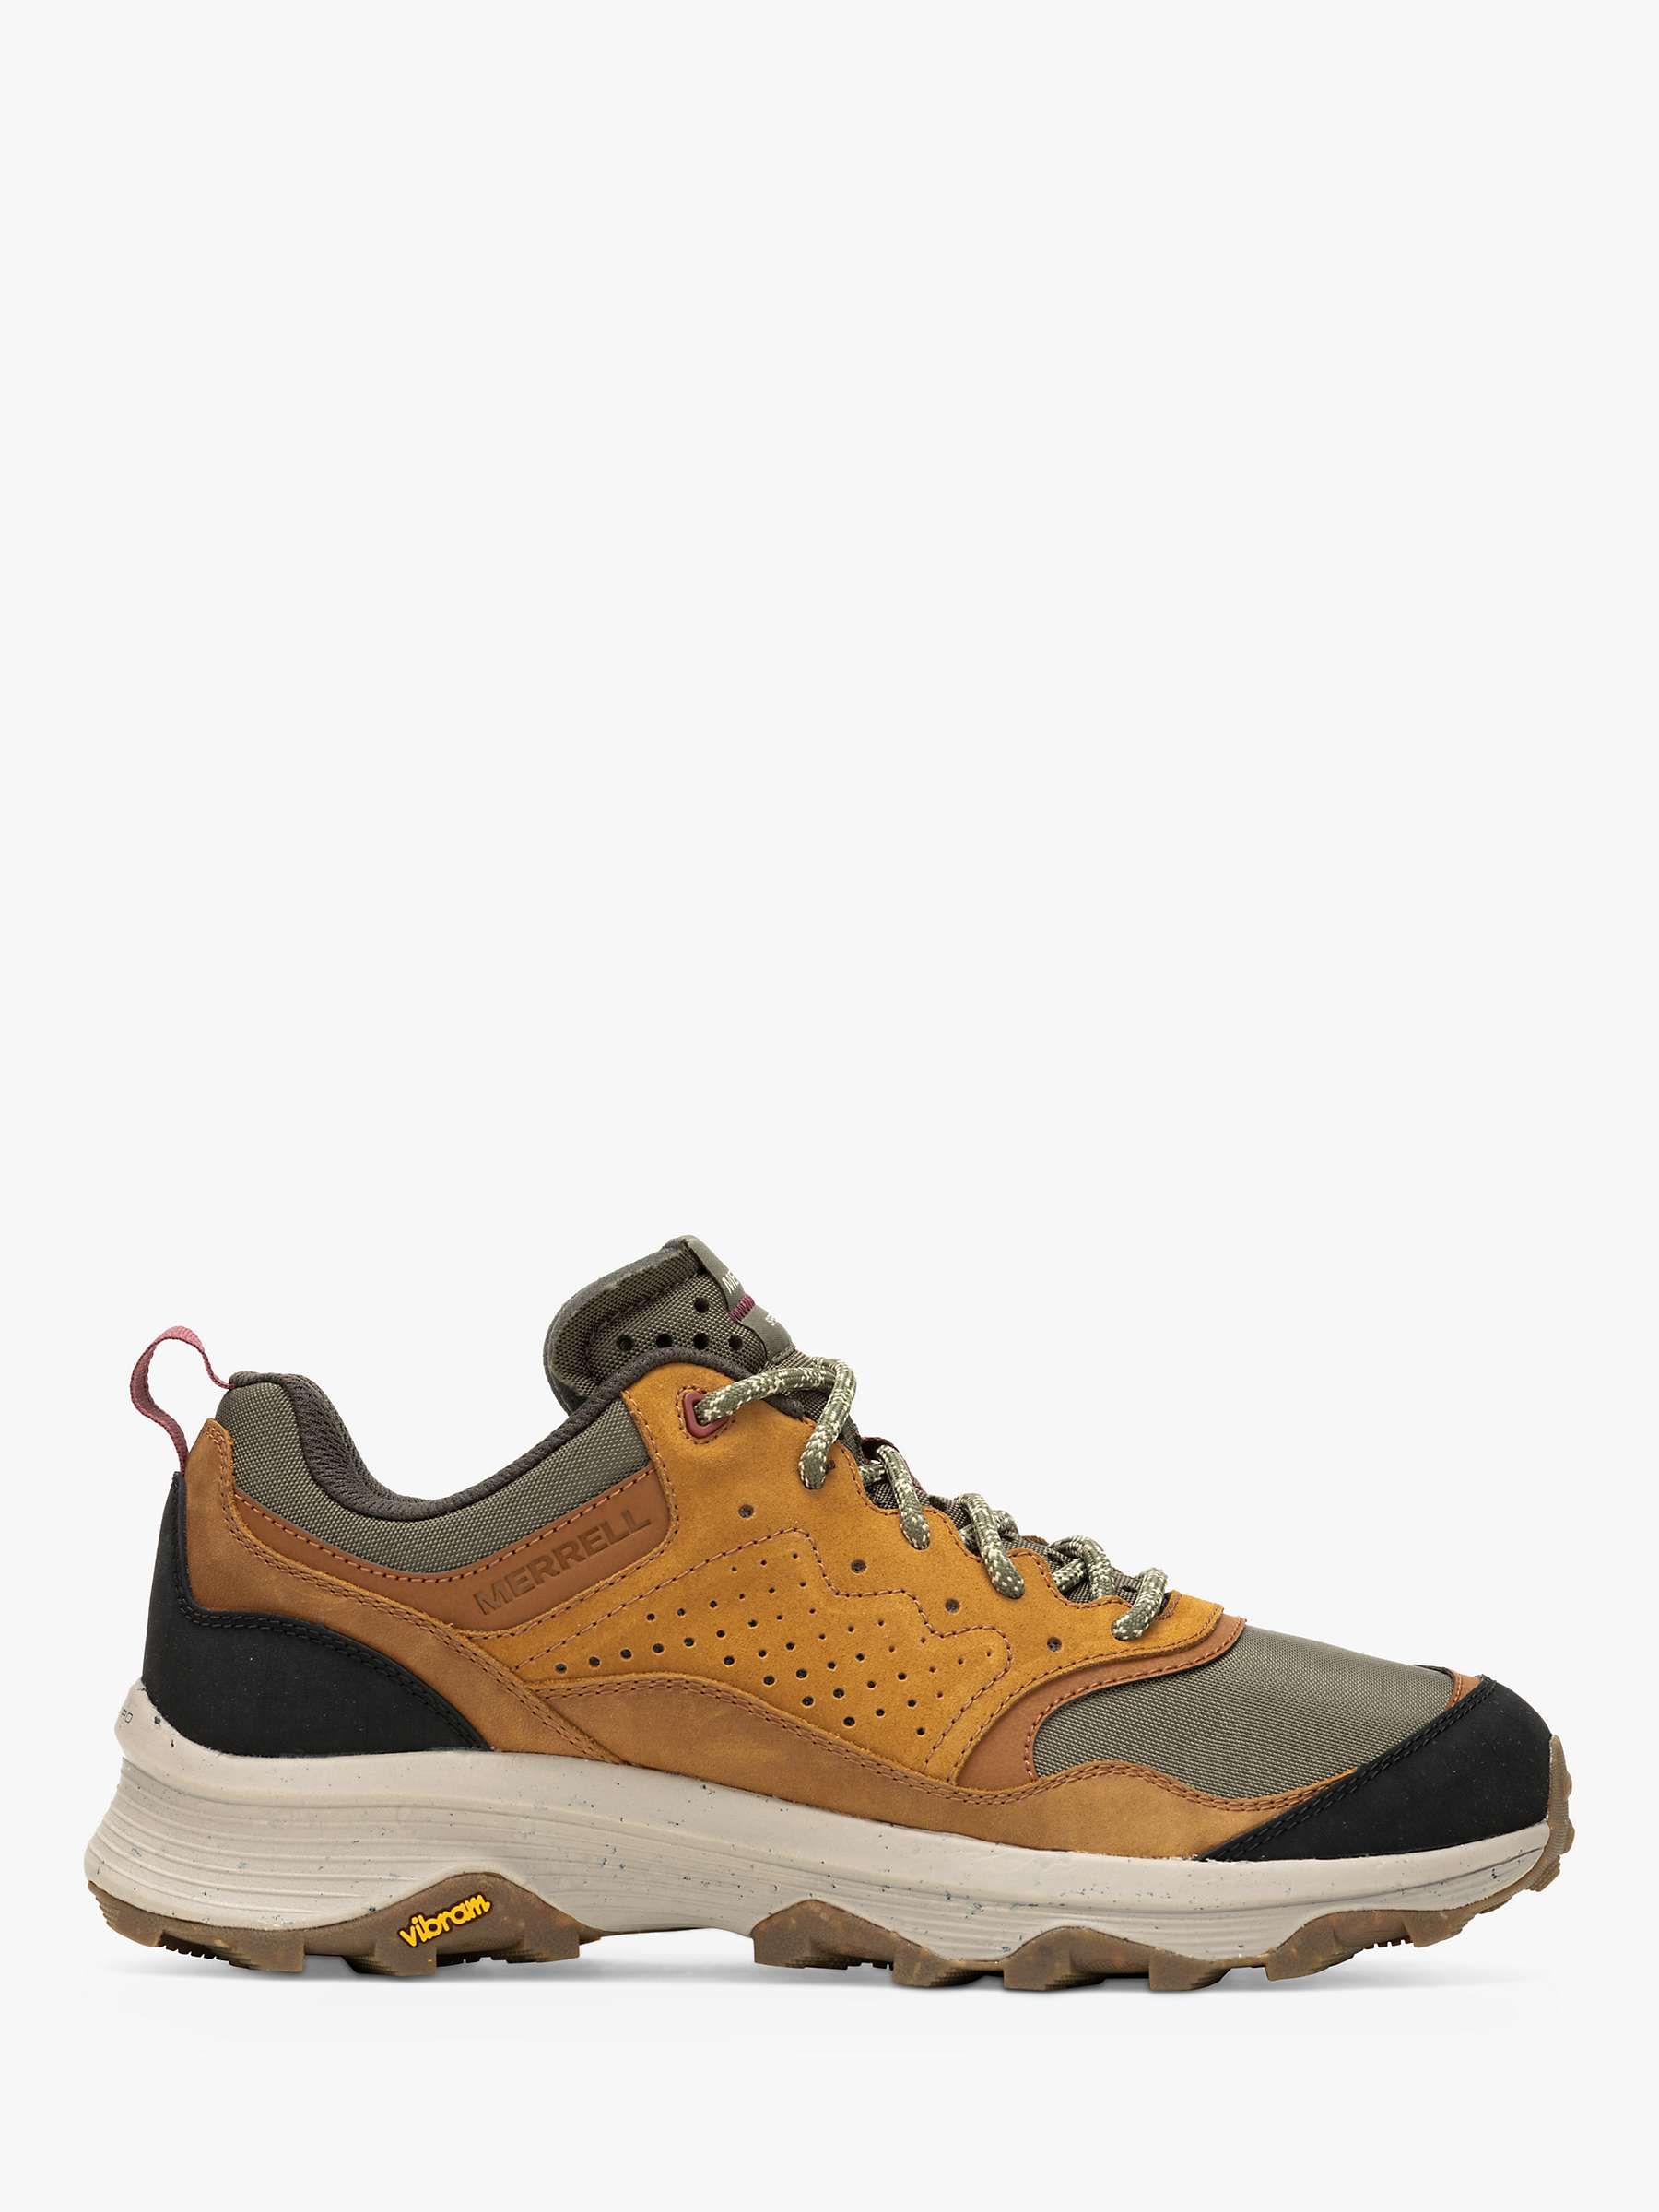 Merrell Speed Solo Men's Walking Shoes, Spice at John Lewis & Partners